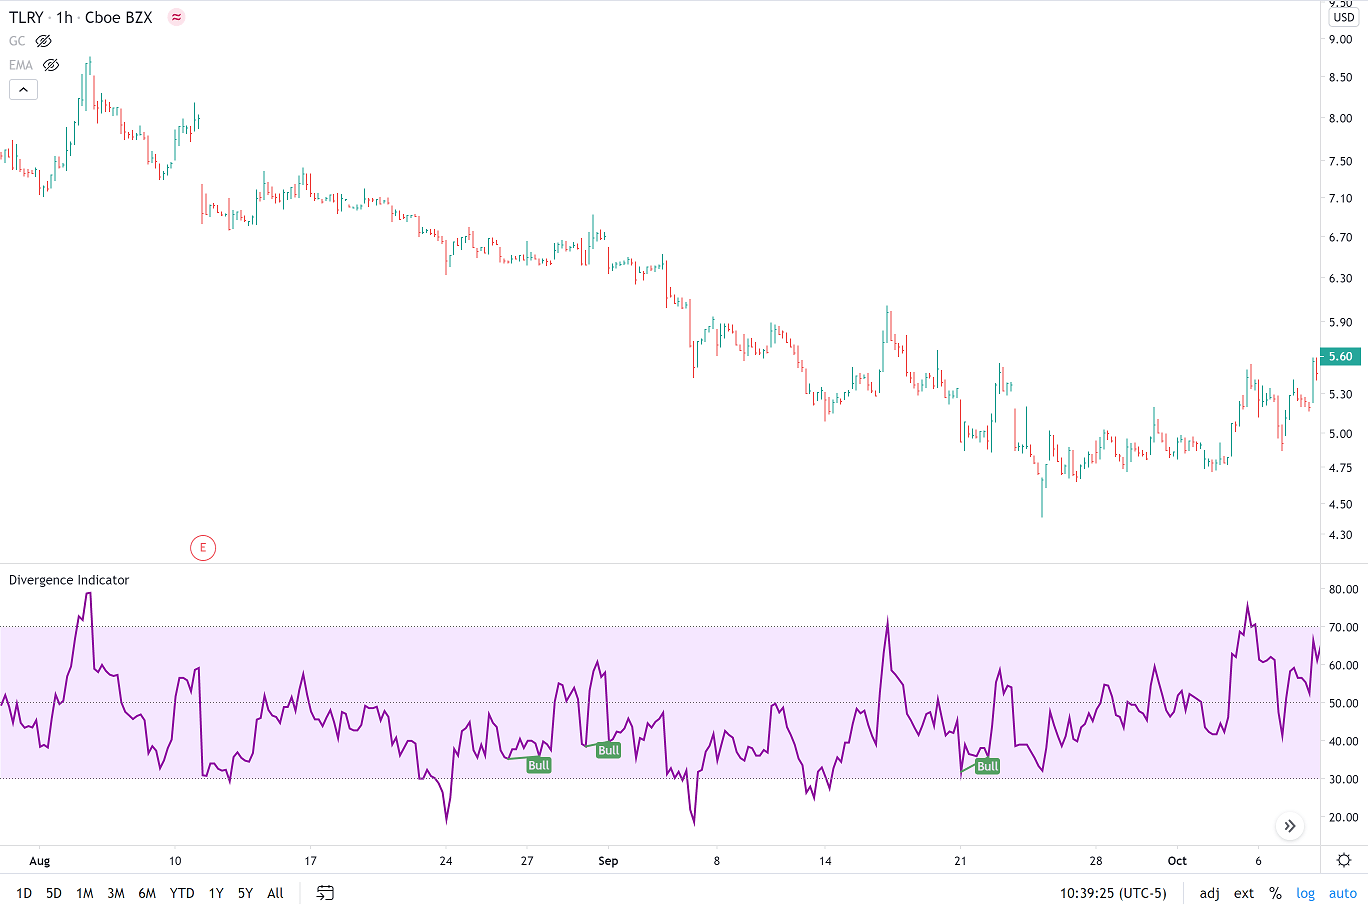 RSI divergences downtrend